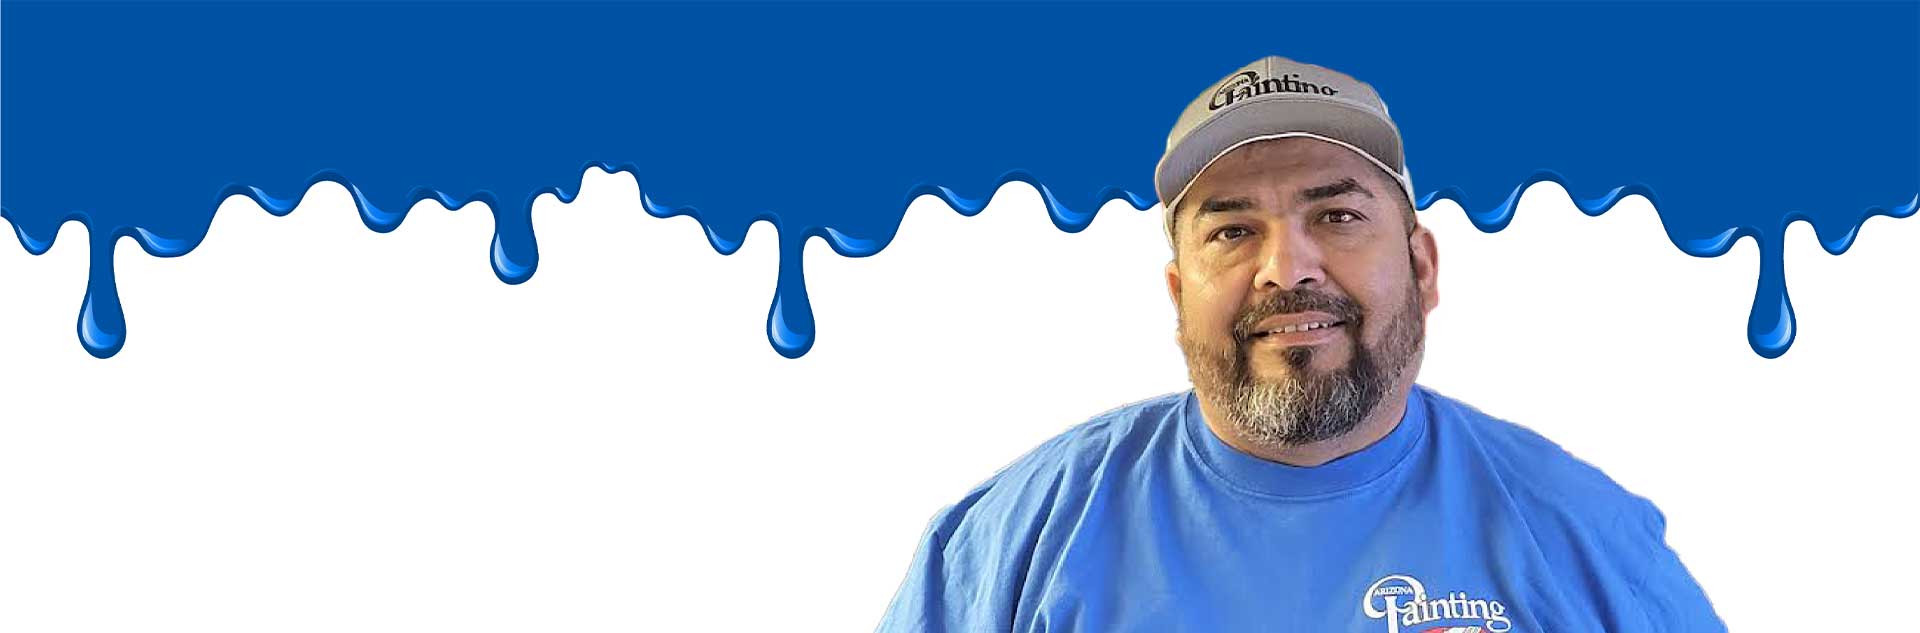 Ruben is shown in the image as the featured employee of Arizona Painting Company. He is shown wearing a long sleeve company shirt against a white background with blue paint drips matching his blue shirt.